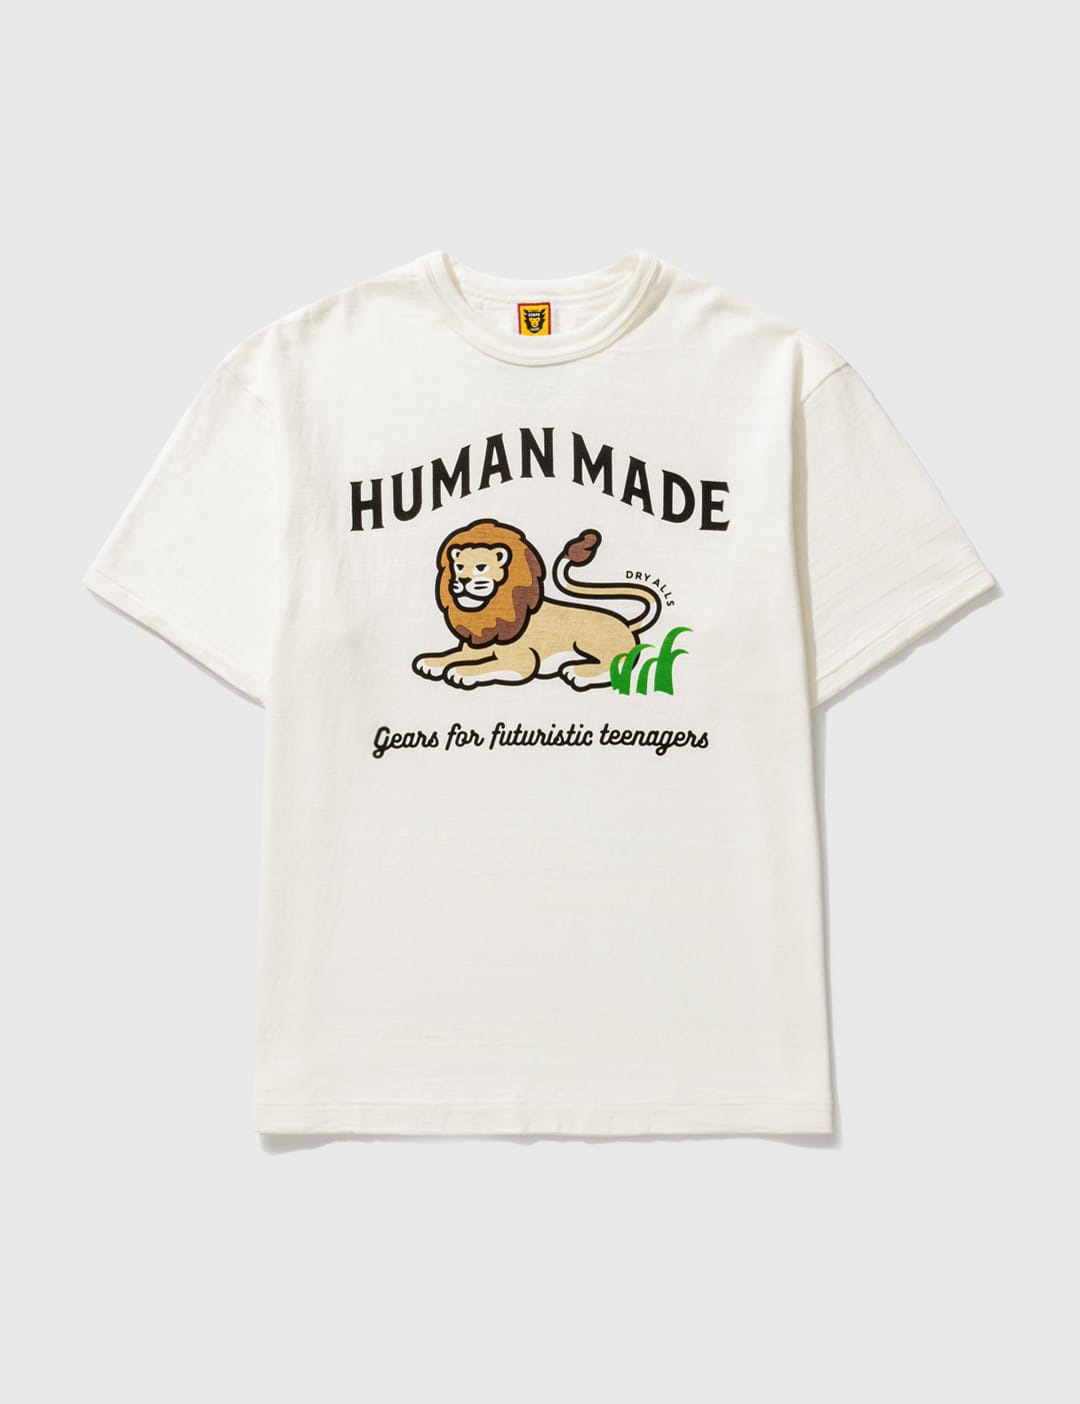 Human Made   HBX   Globally Curated Fashion and Lifestyle by Hypebeast